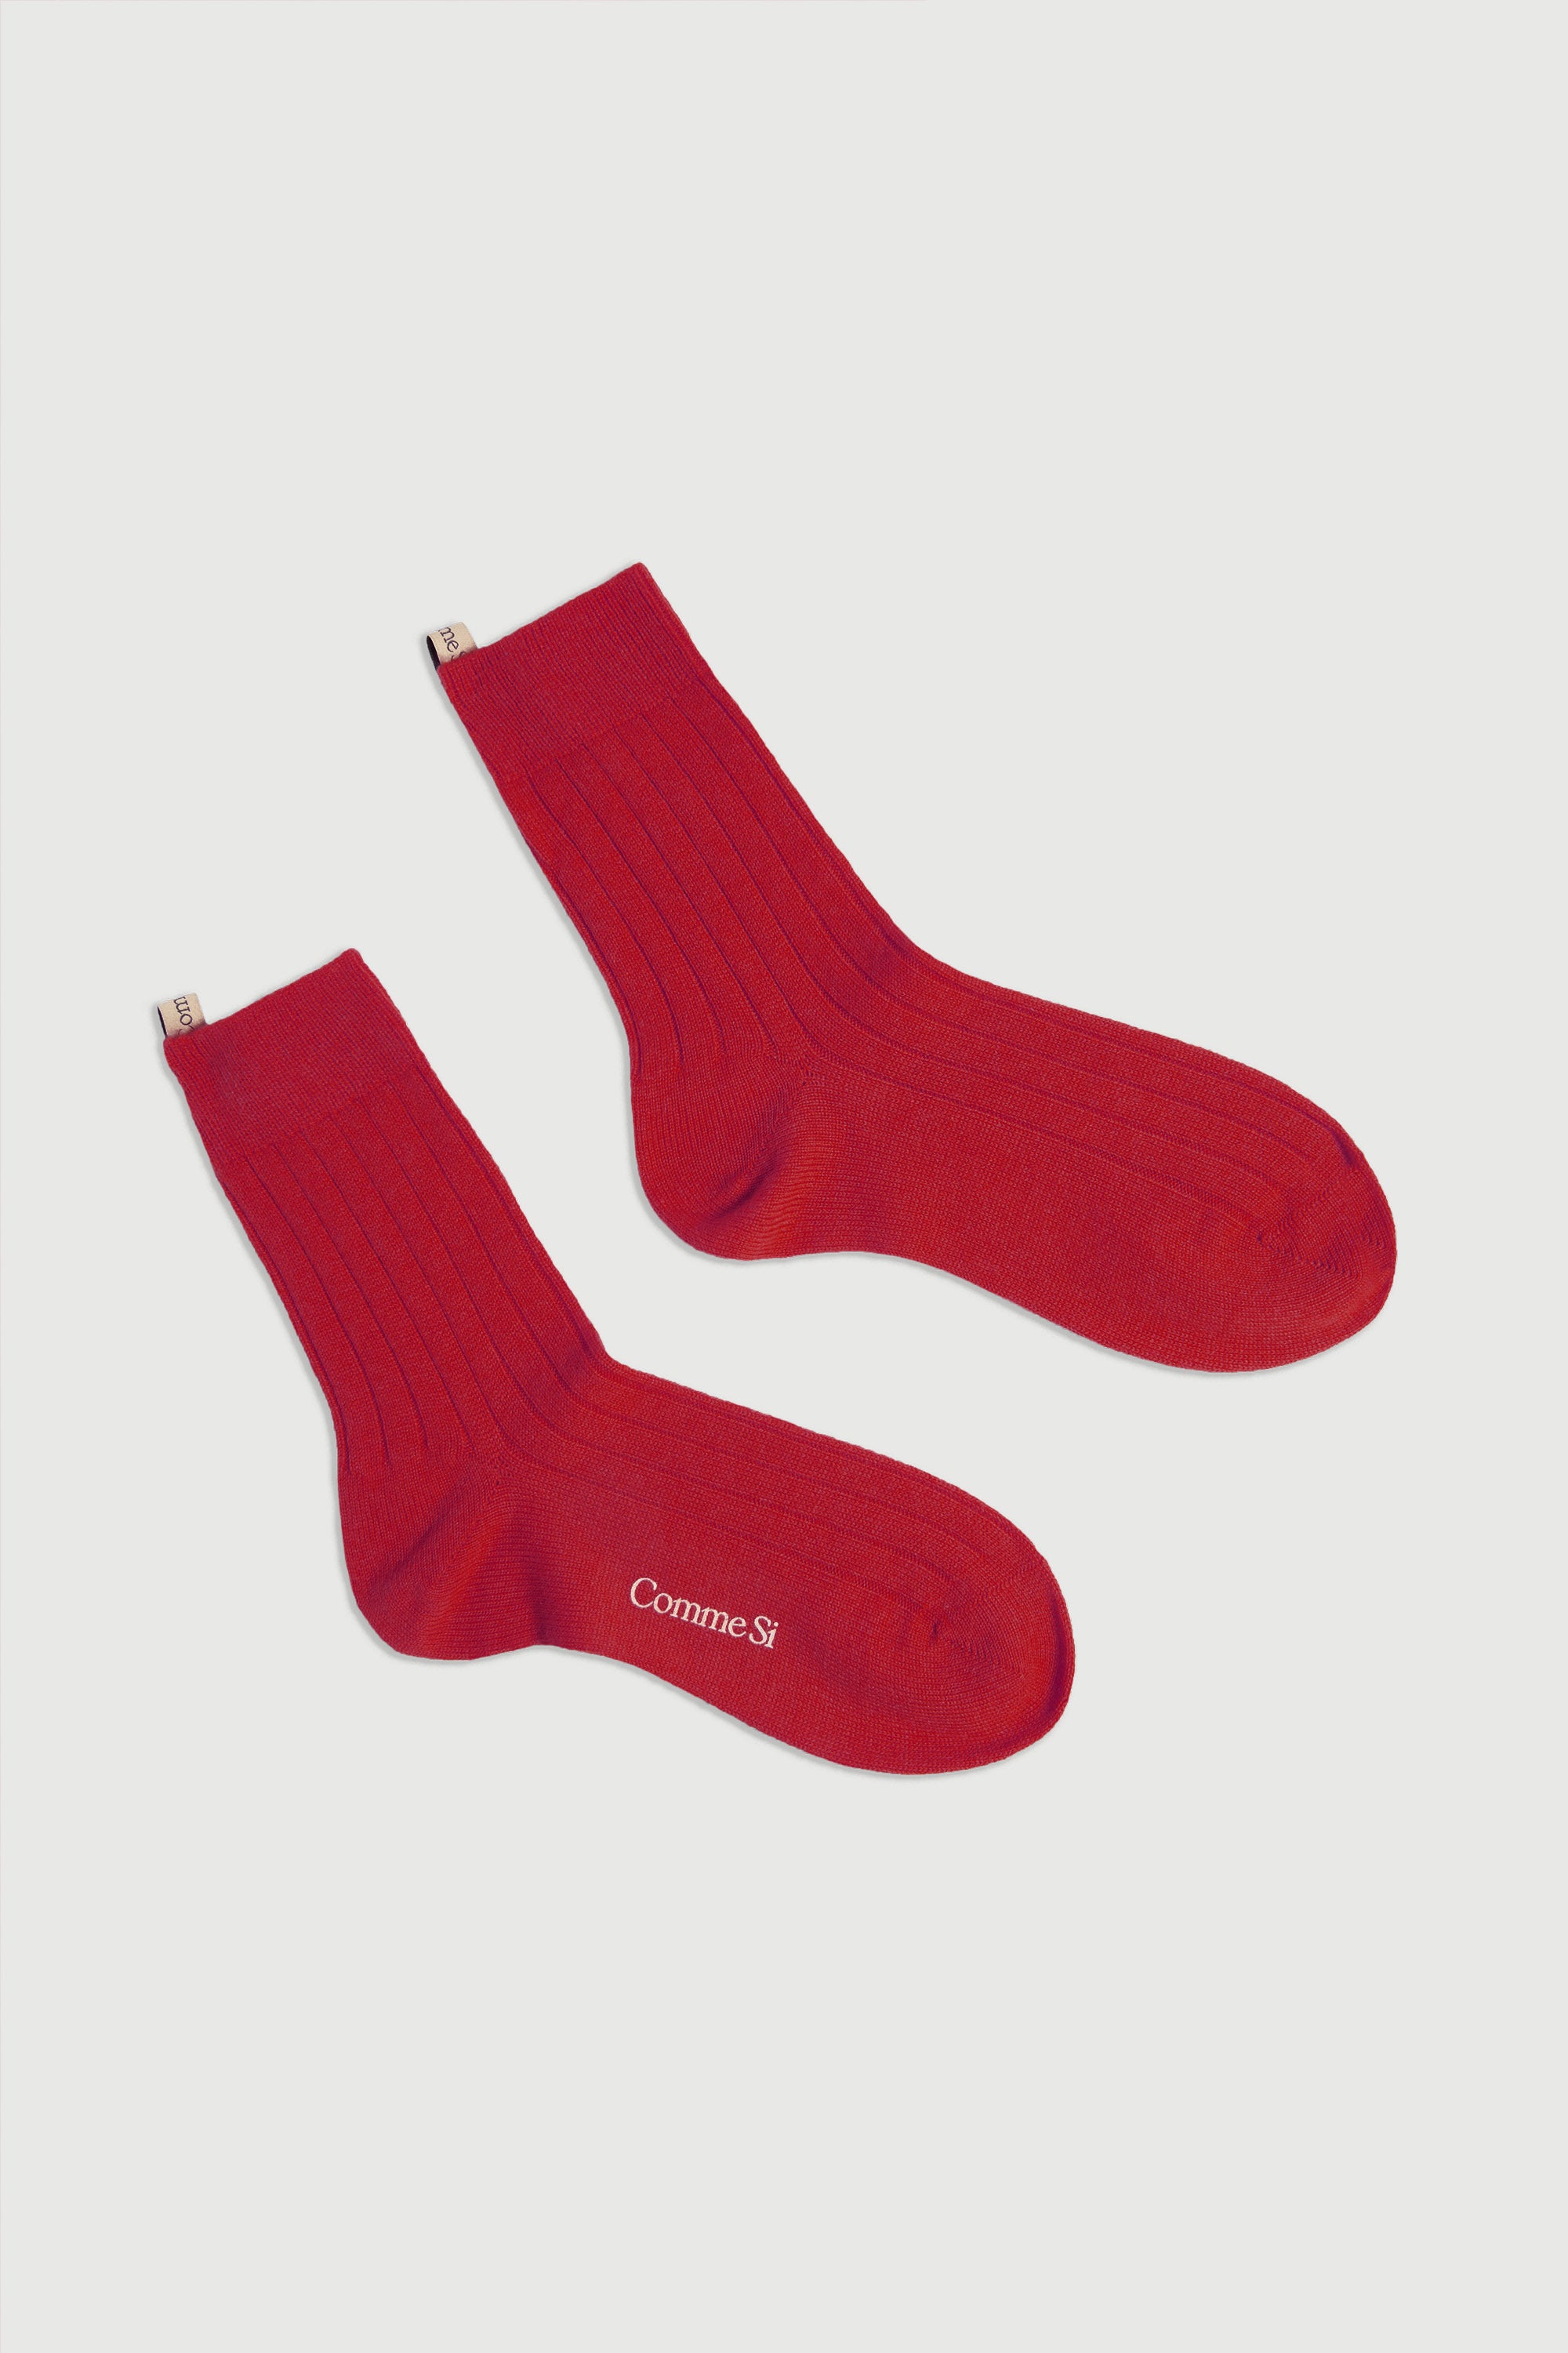 The Danielle Sock, Mongolian Cashmere, Cherry, Comme Si